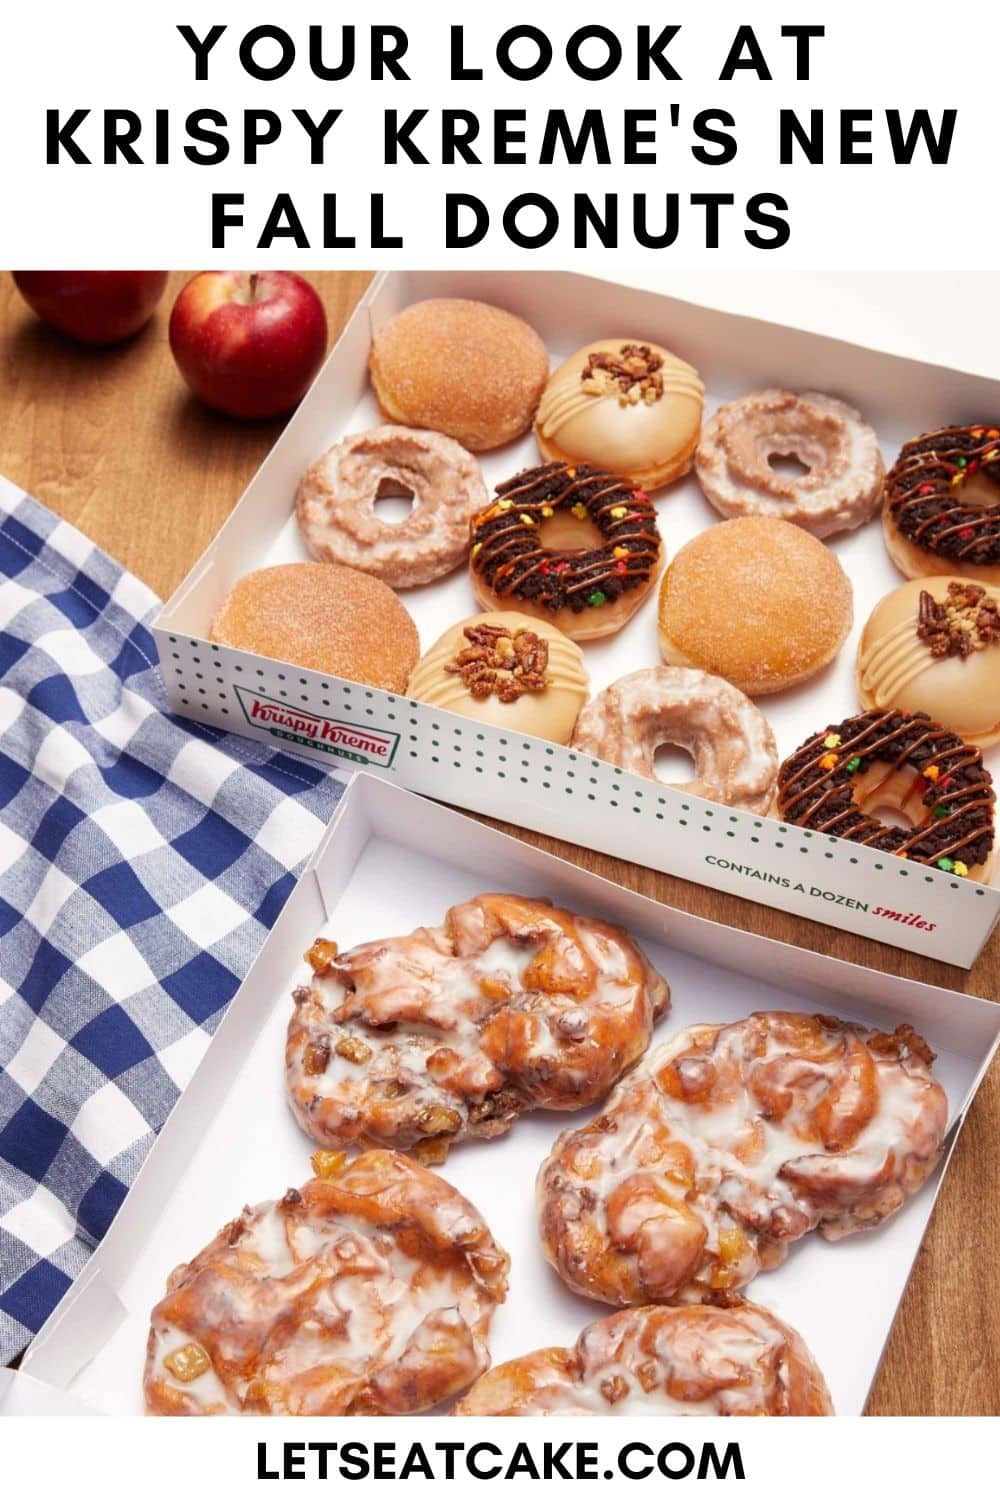 Krispy Kreme Adds Apple Fritters and New Fall Donuts to Their Fall Menu